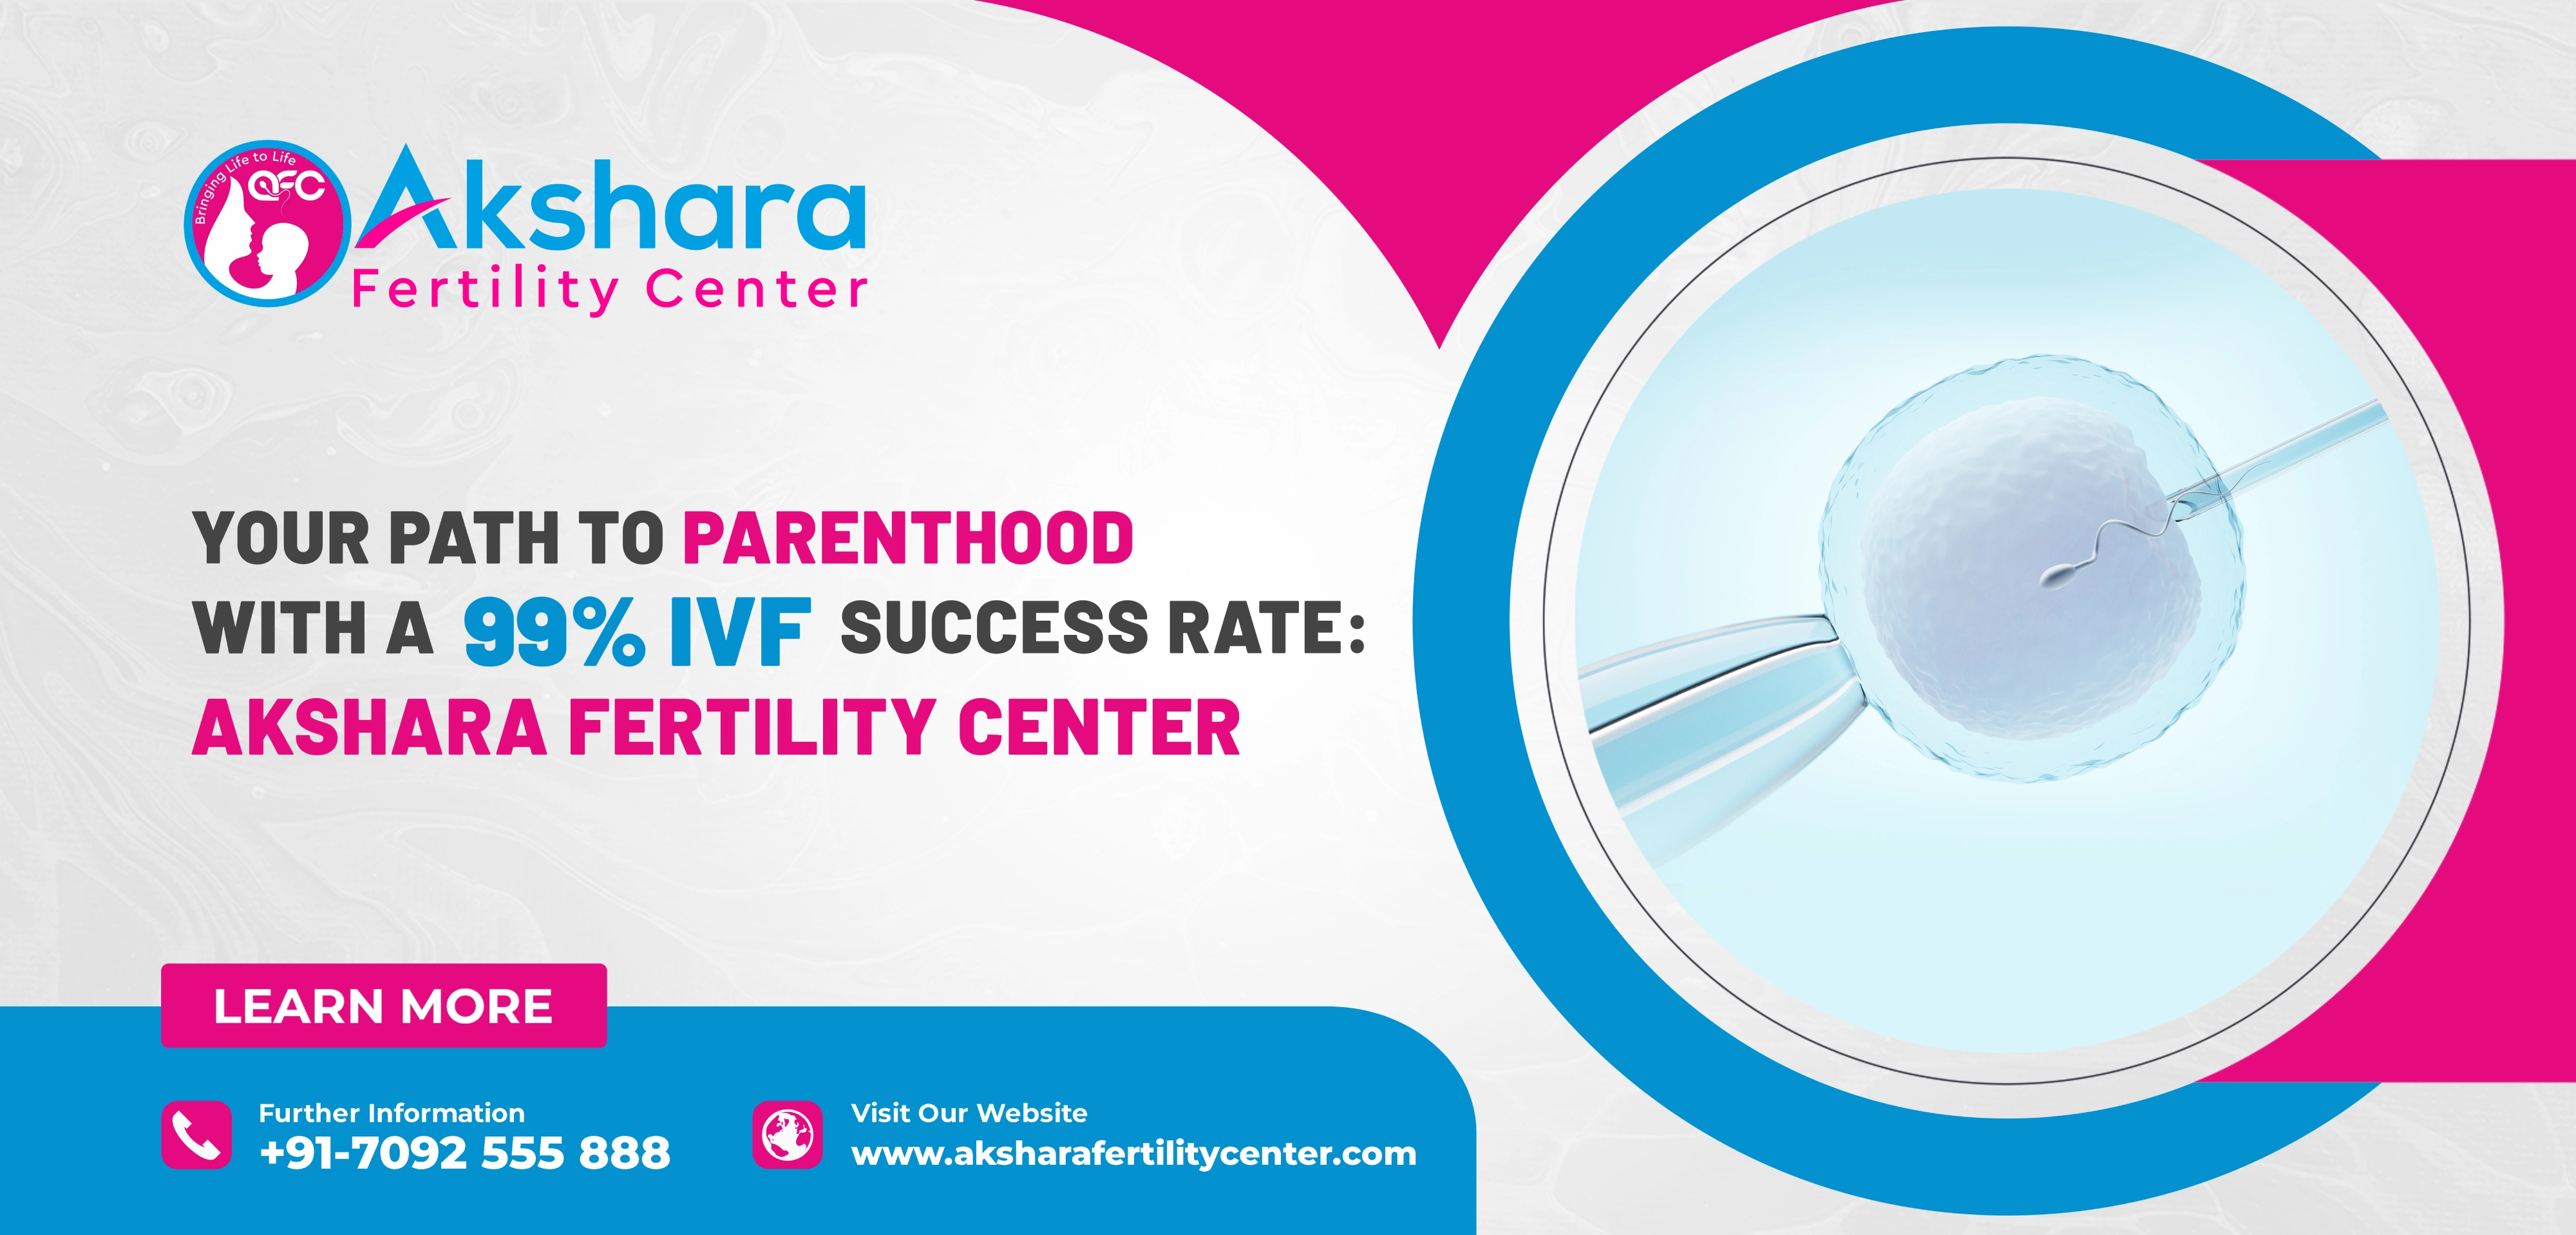 Achieve Parenthood with Akshara Fertility Center: Best IVF Treatment in Chennai with Over 99% Success Rate